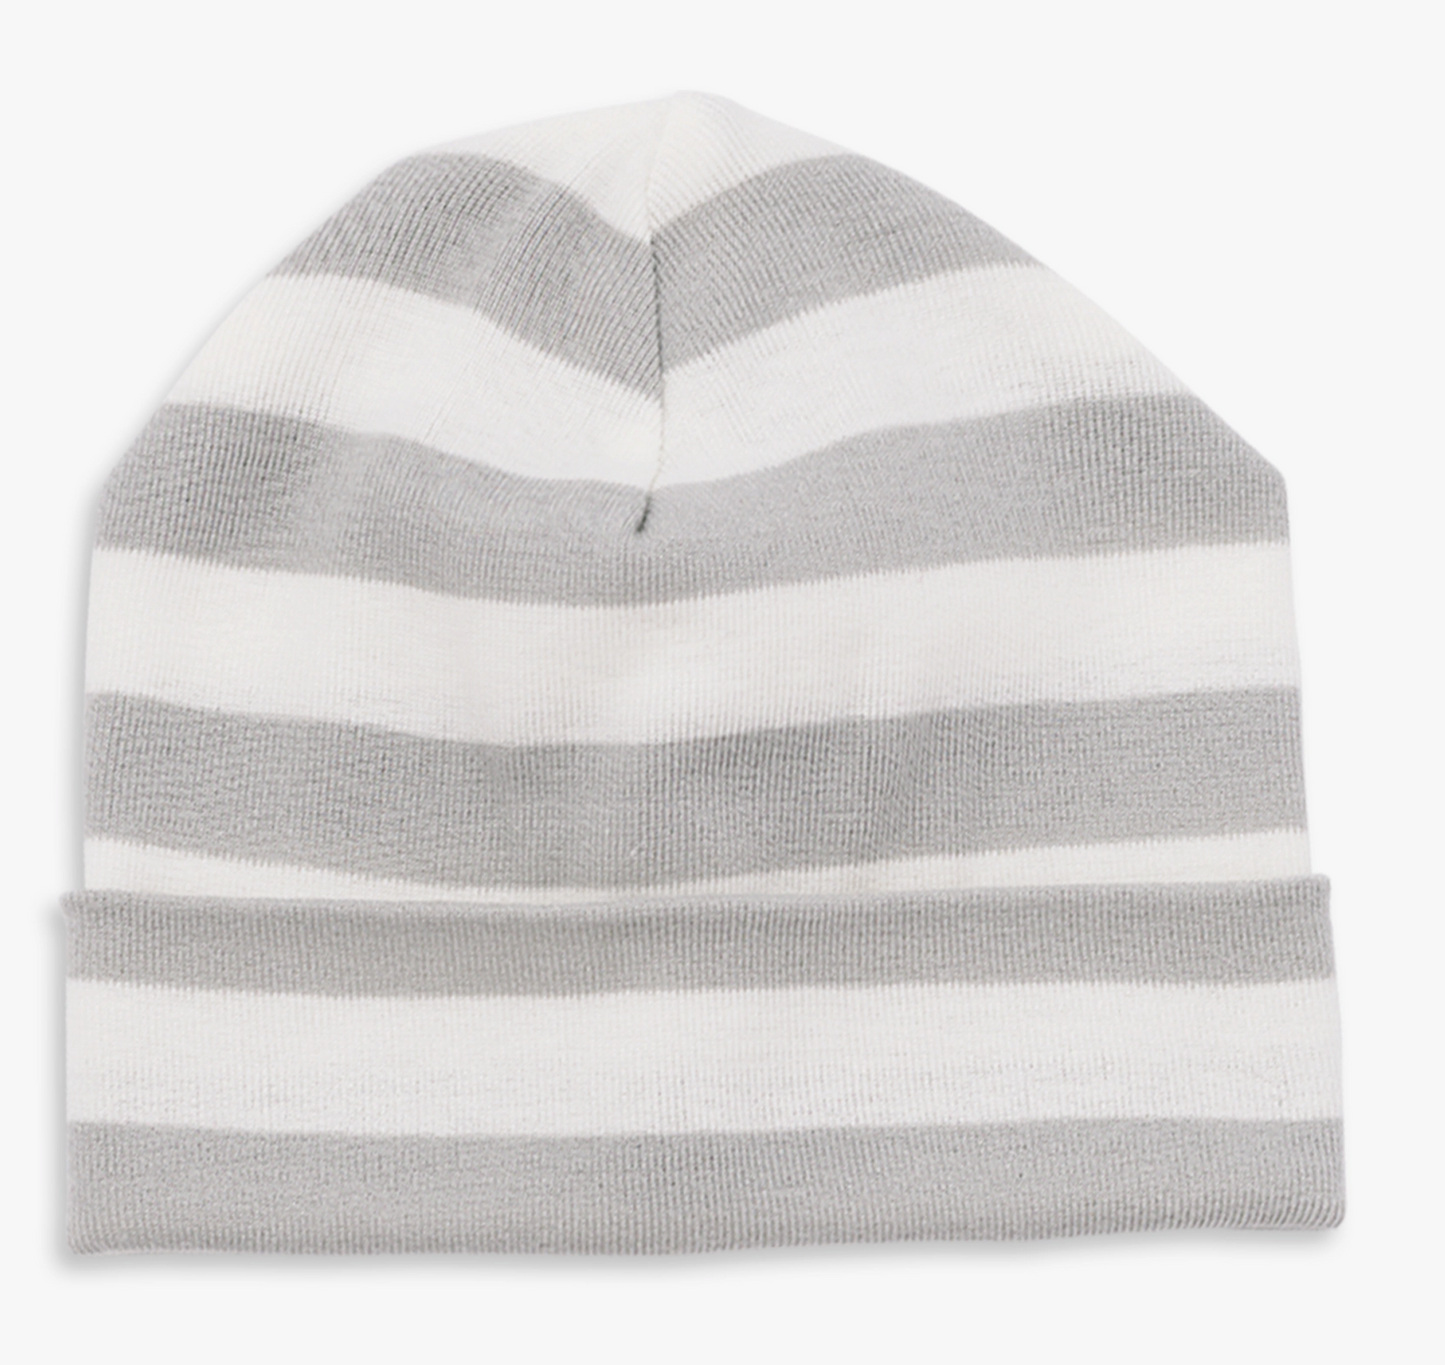 Jersey Cotton Baby Beanies